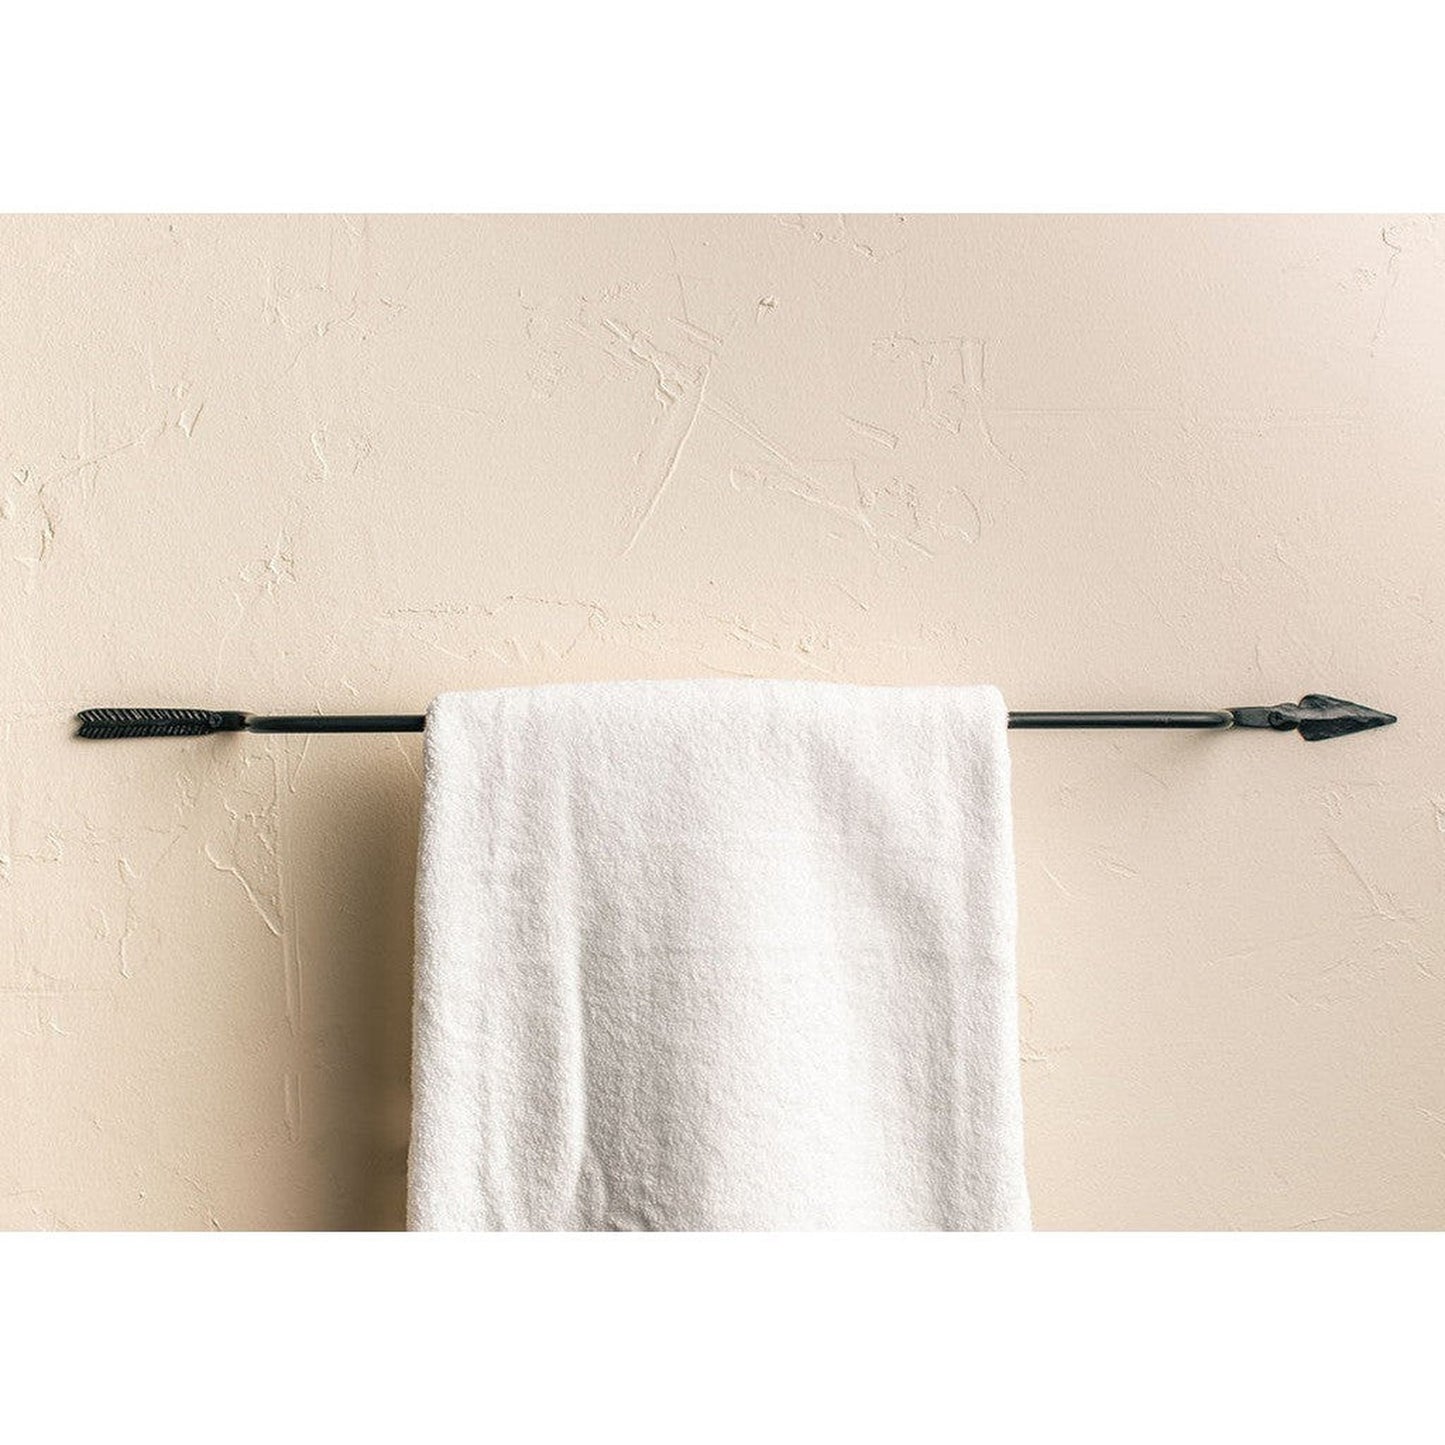 Stone County Ironworks Quapaw 32" Natural Black Iron Towel Bar With Copper Iron Accent